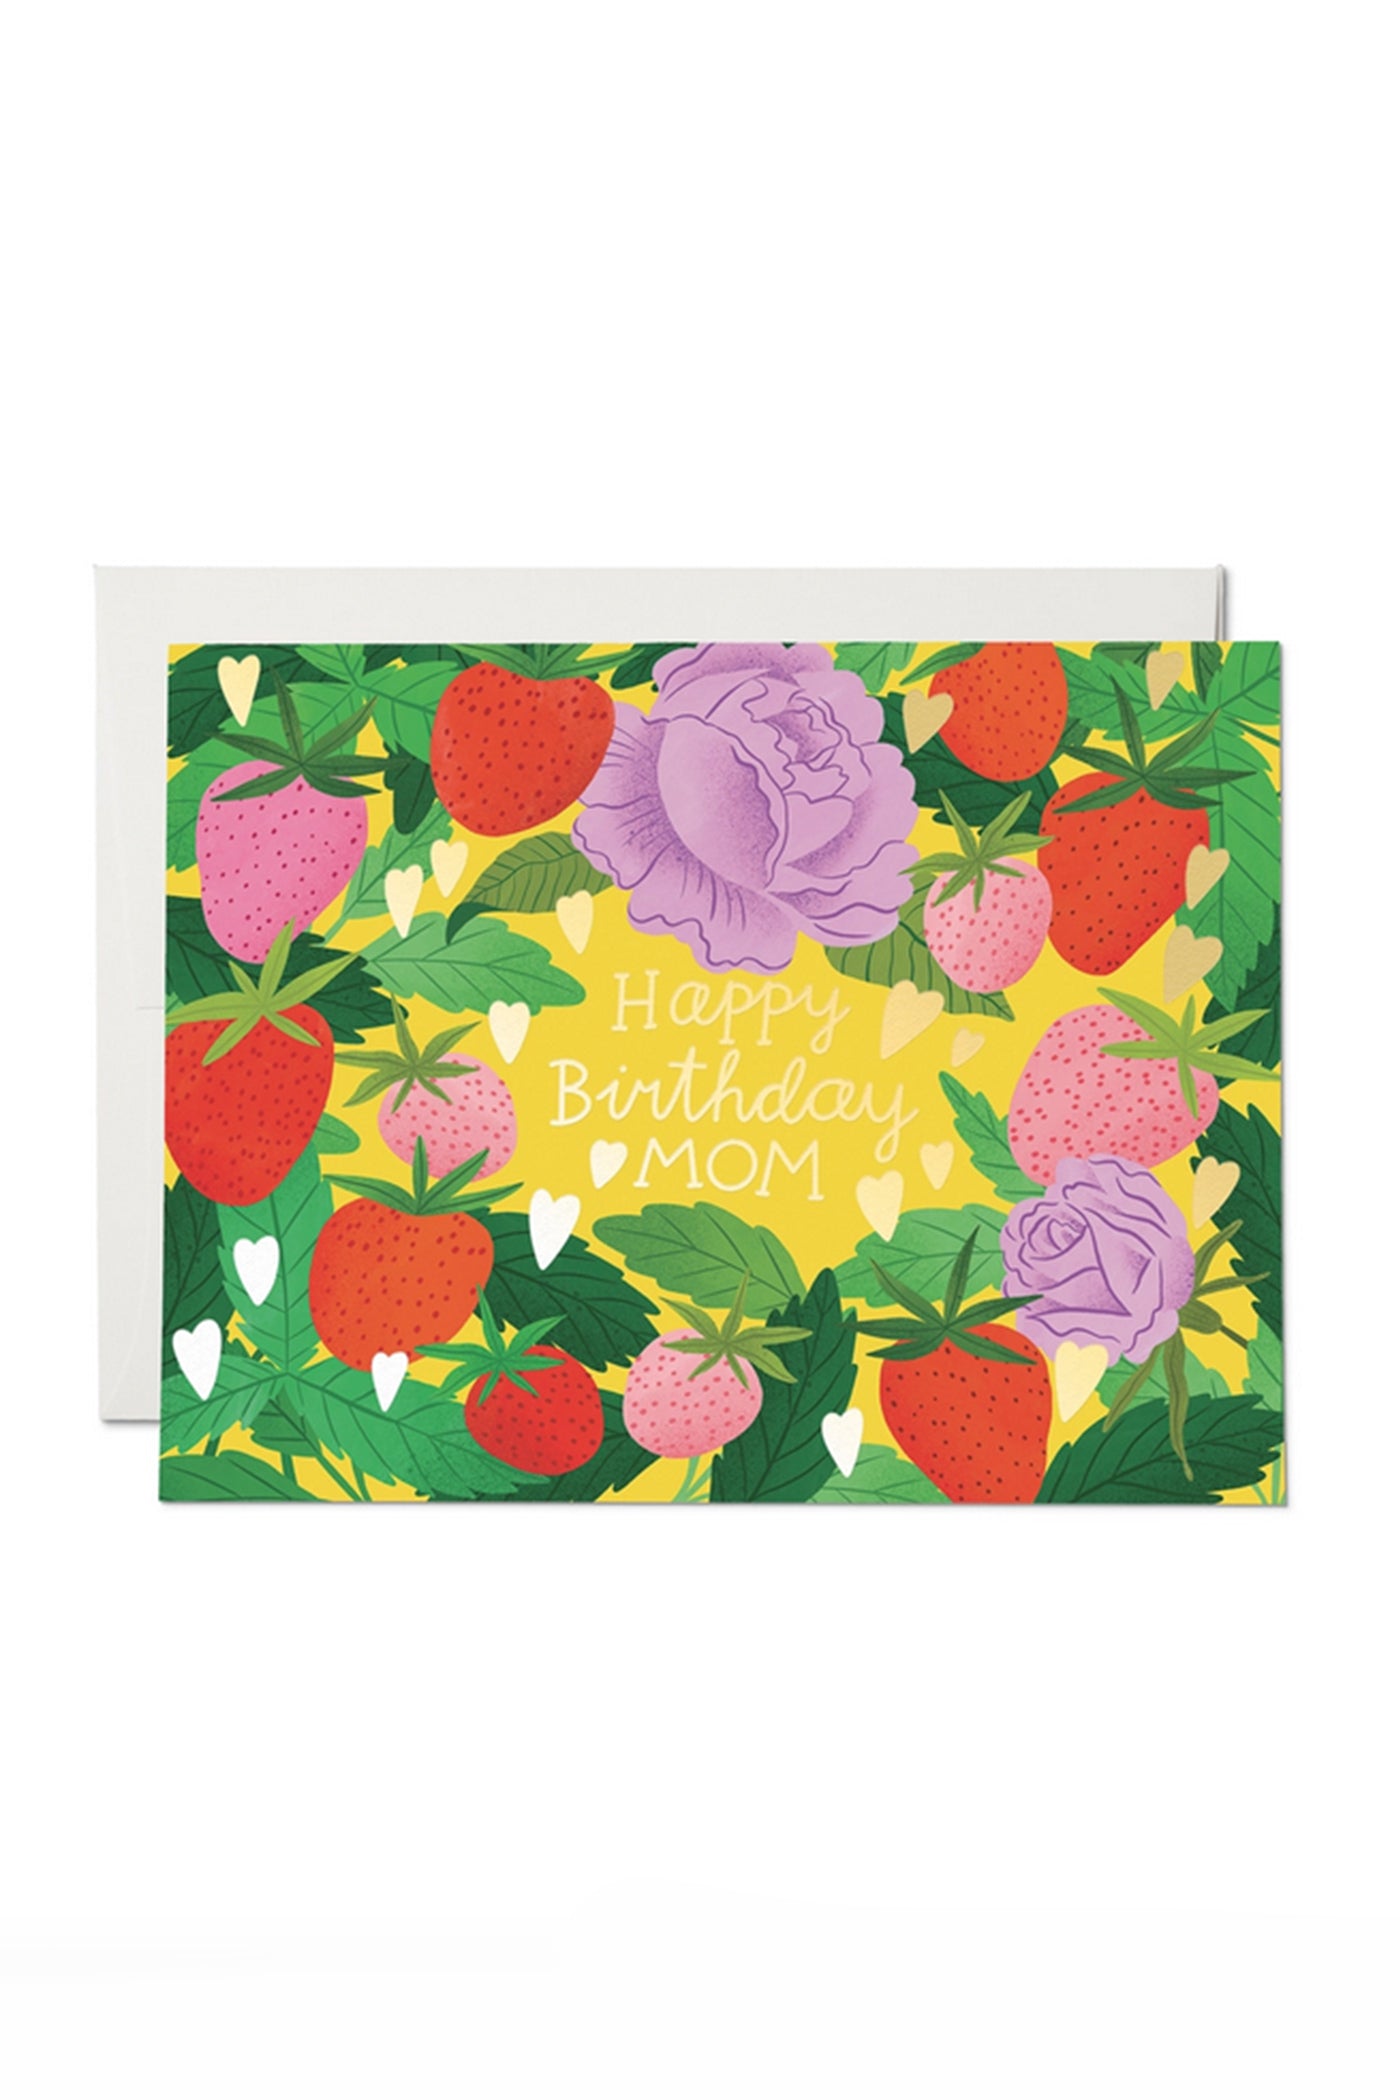 Stawberry Mom Birthday Card by Red Cap Cards